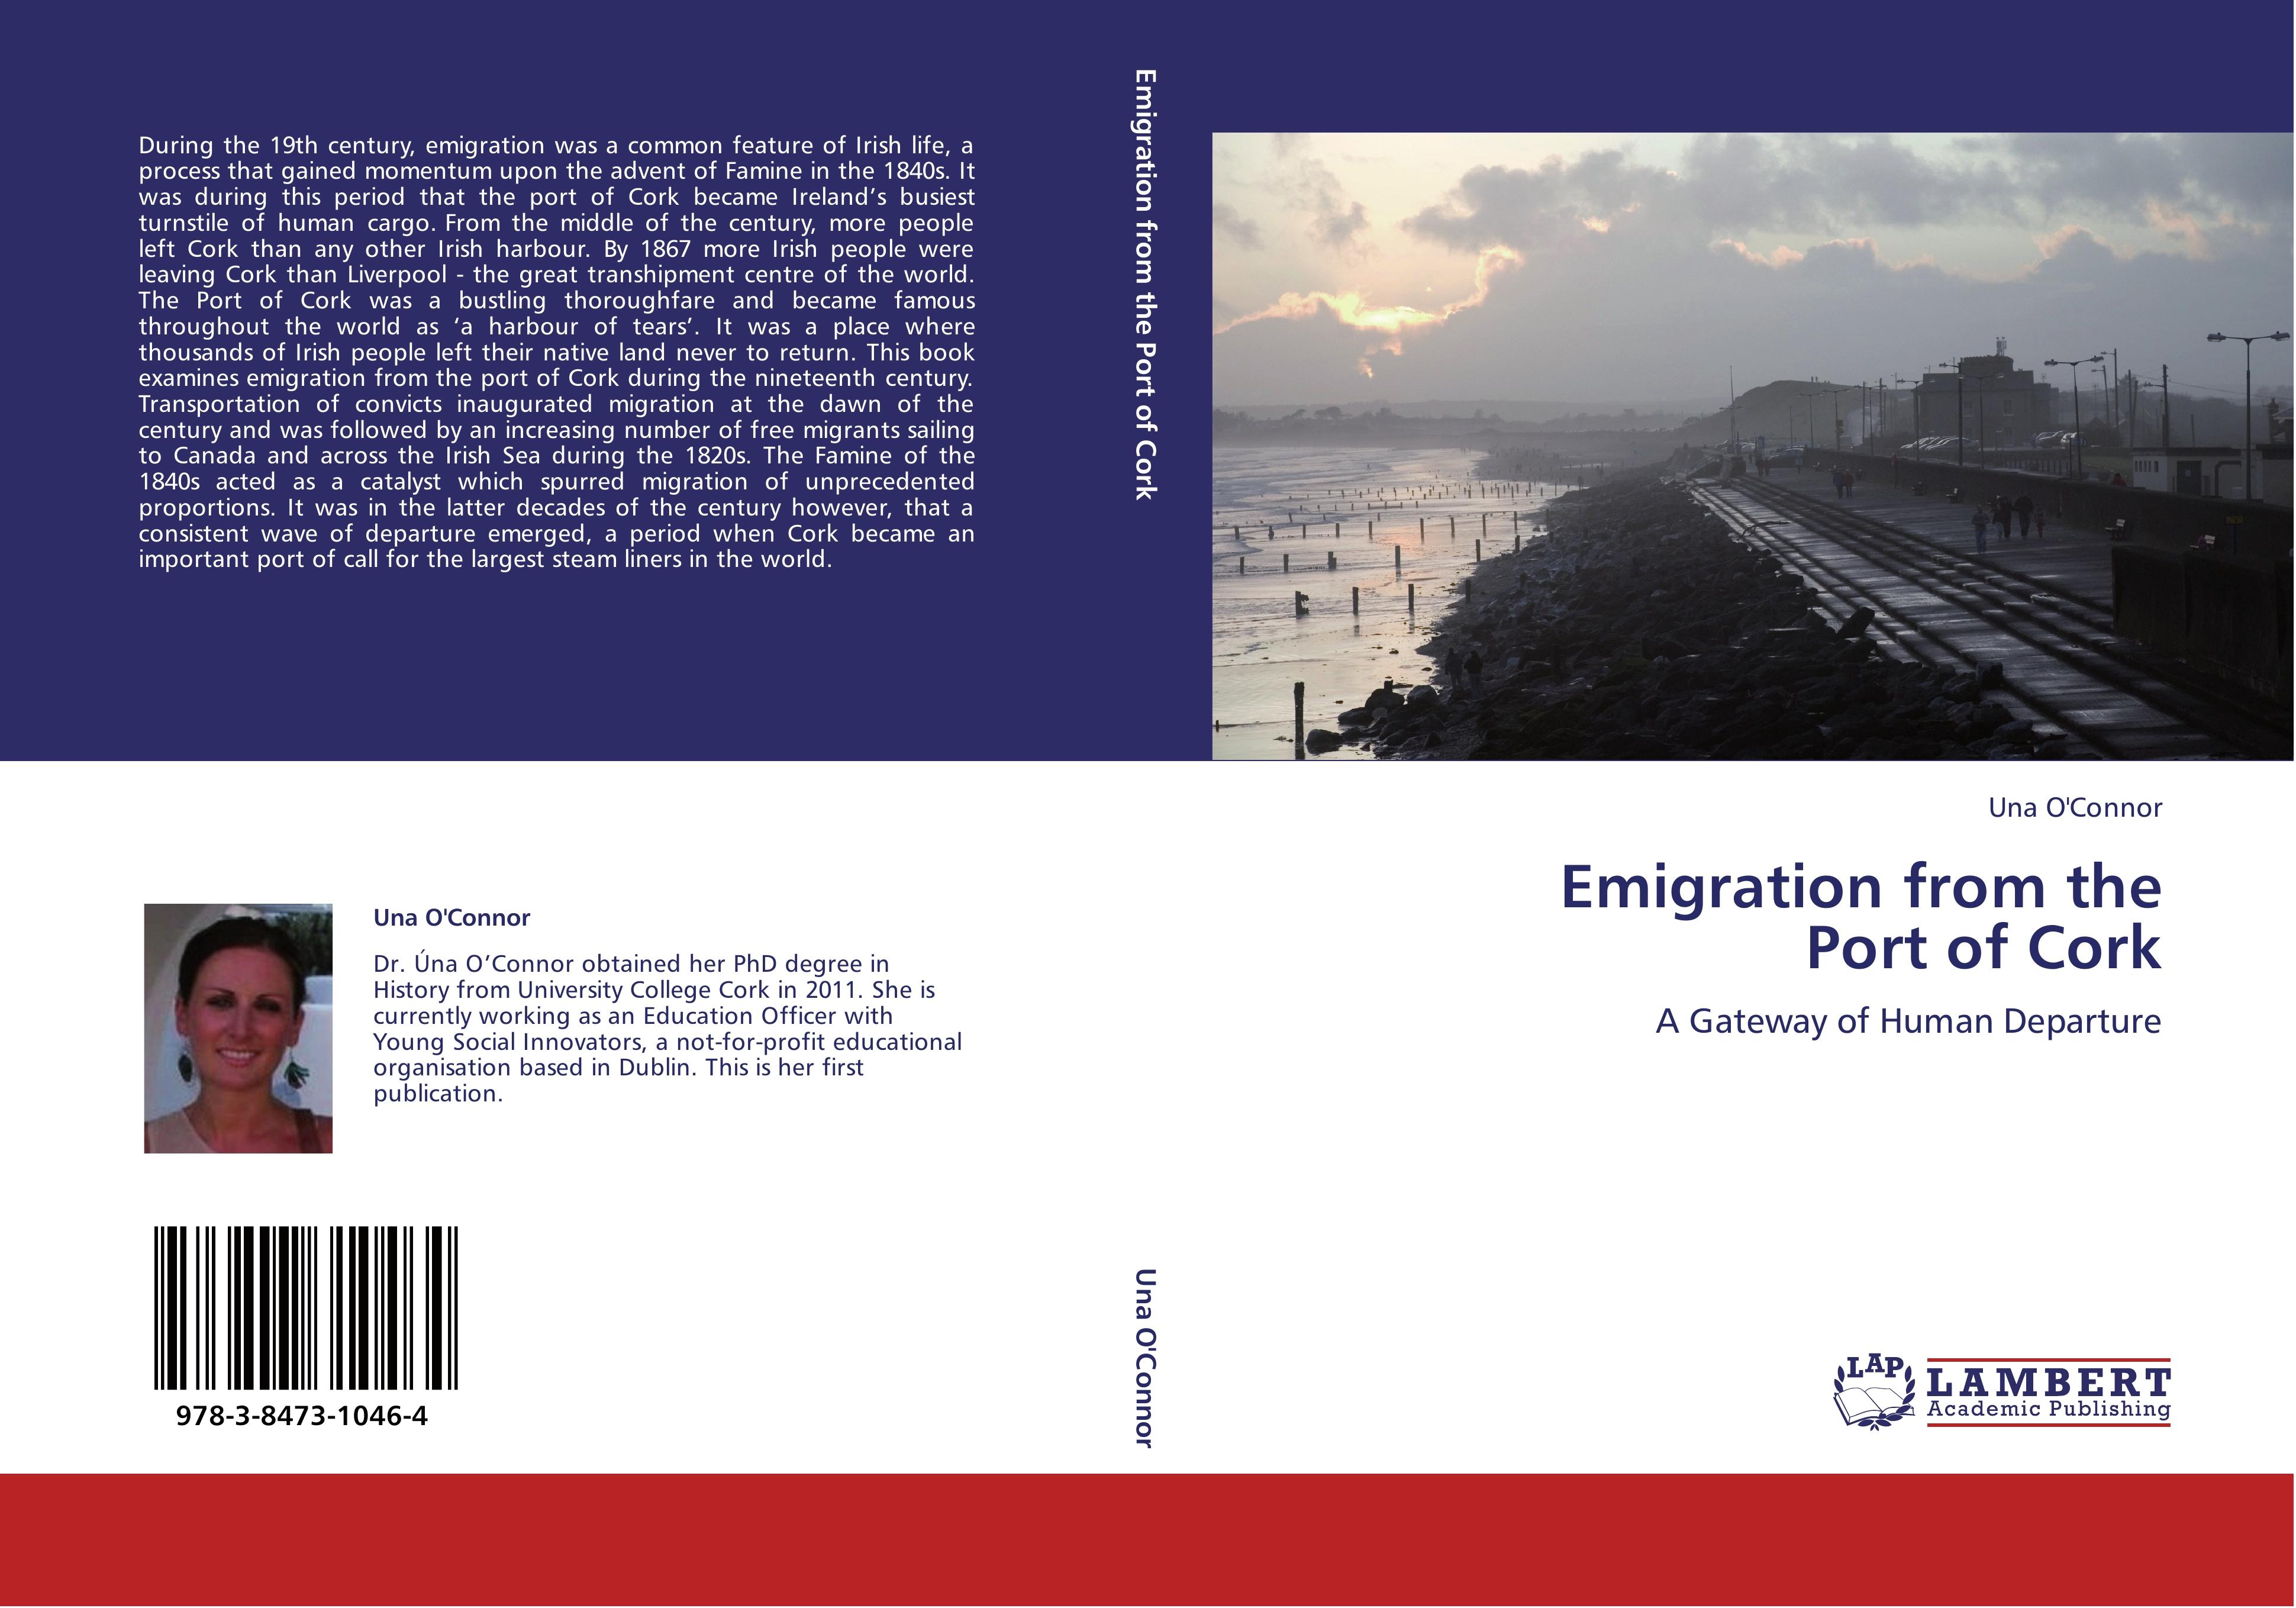 Emigration from the Port of Cork / A Gateway of Human Departure / Una O'Connor / Taschenbuch / Paperback / 308 S. / Englisch / 2012 / LAP LAMBERT Academic Publishing / EAN 9783847310464 - O'Connor, Una